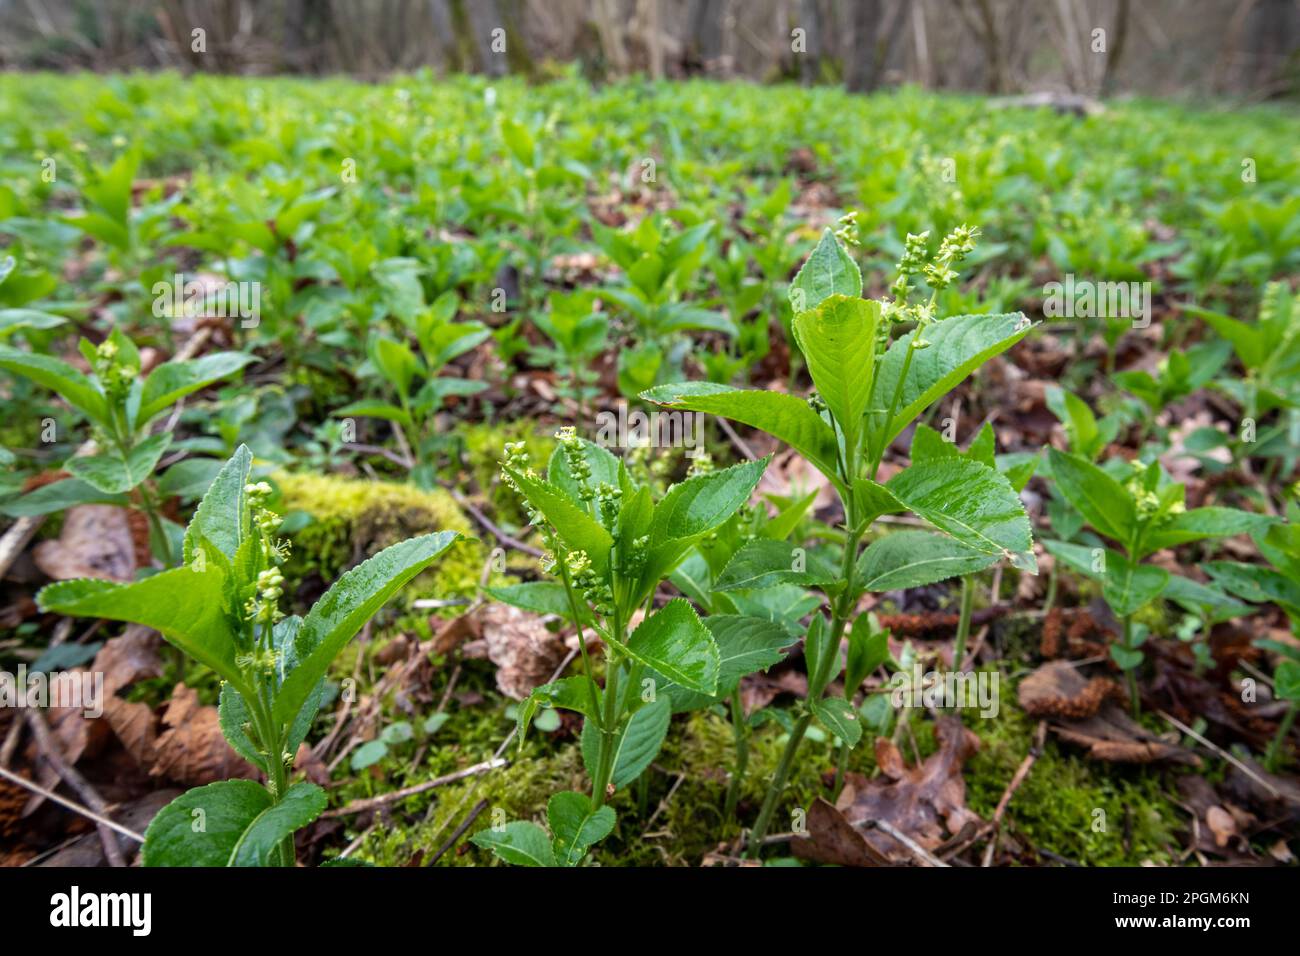 Dog's mercury (Mercurialis perennis) covering the woodland floor during March or spring, Hampshire, England, UK Stock Photo